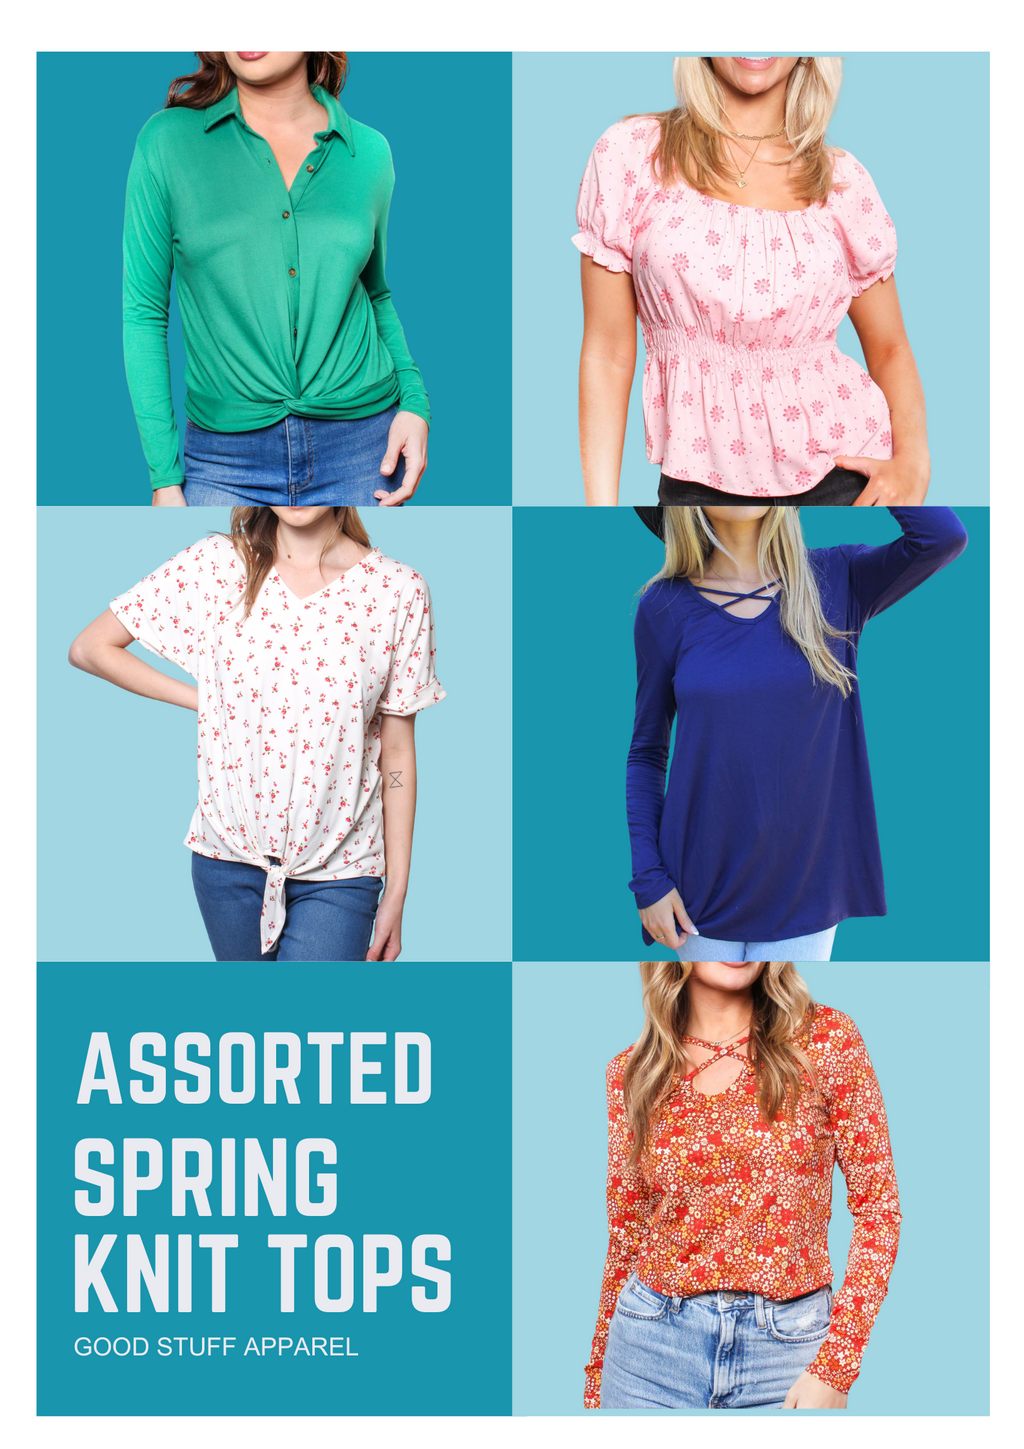 ASSORTED Spring Knit Tops